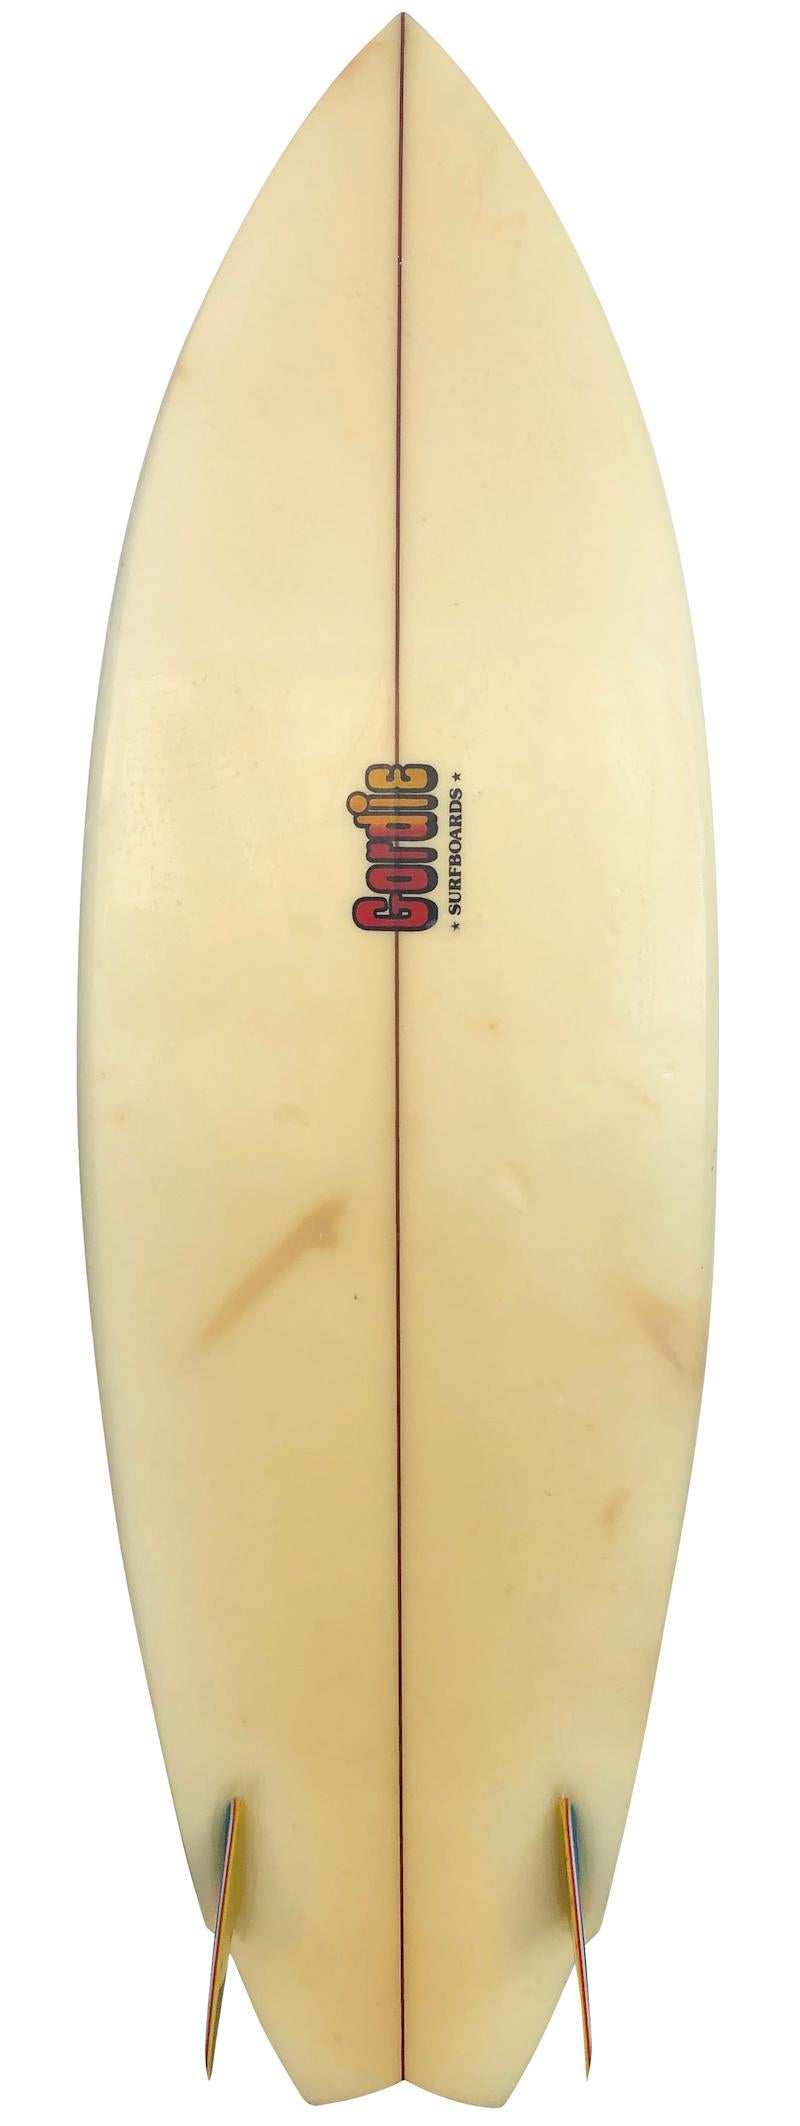 Mid-1980s Gordie Surfboards twin-fin fish short board. Features a winged swallow tail design, blue and orange airbrush, and original rainbow glass-on twin fin setup. A great example of a 1980s surfboard fish in all original condition.